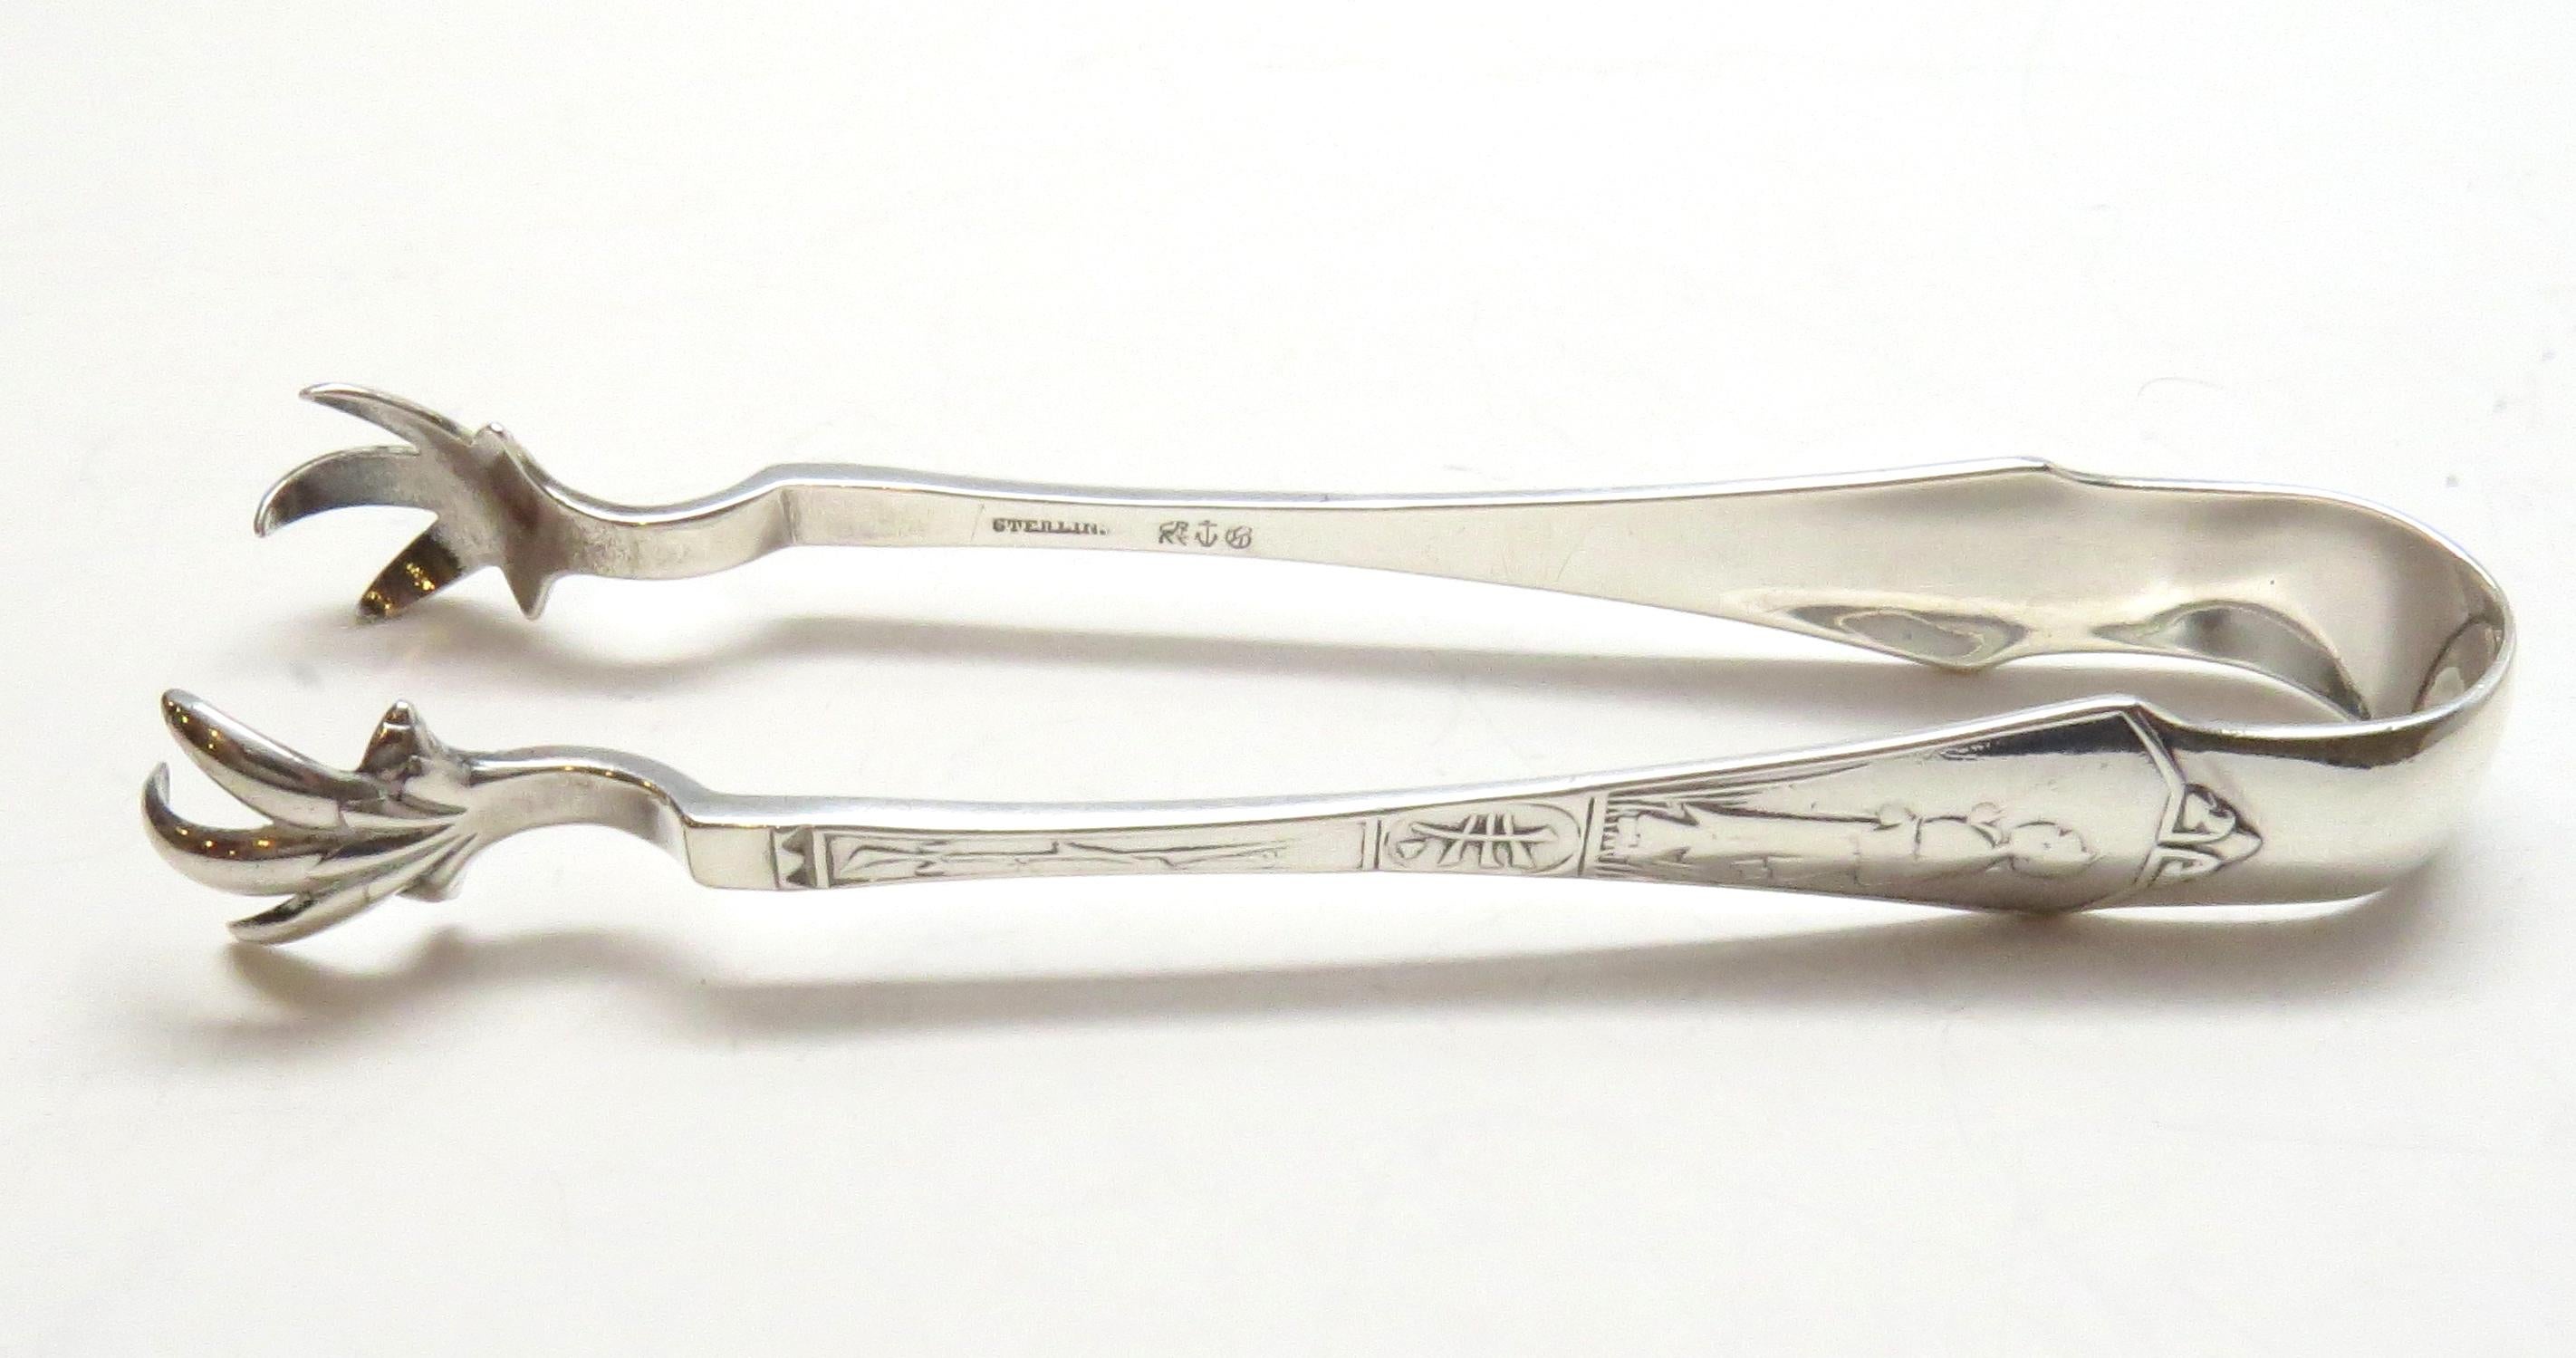 Gorham sterling silver sugar/ice tongs in the 1875 Japanese pattern.
 Marked: lion anchor G, Sterling, Starr & Marcus. 
Engraved on end appears to be: Stutzer. 
Measures 4 1/2